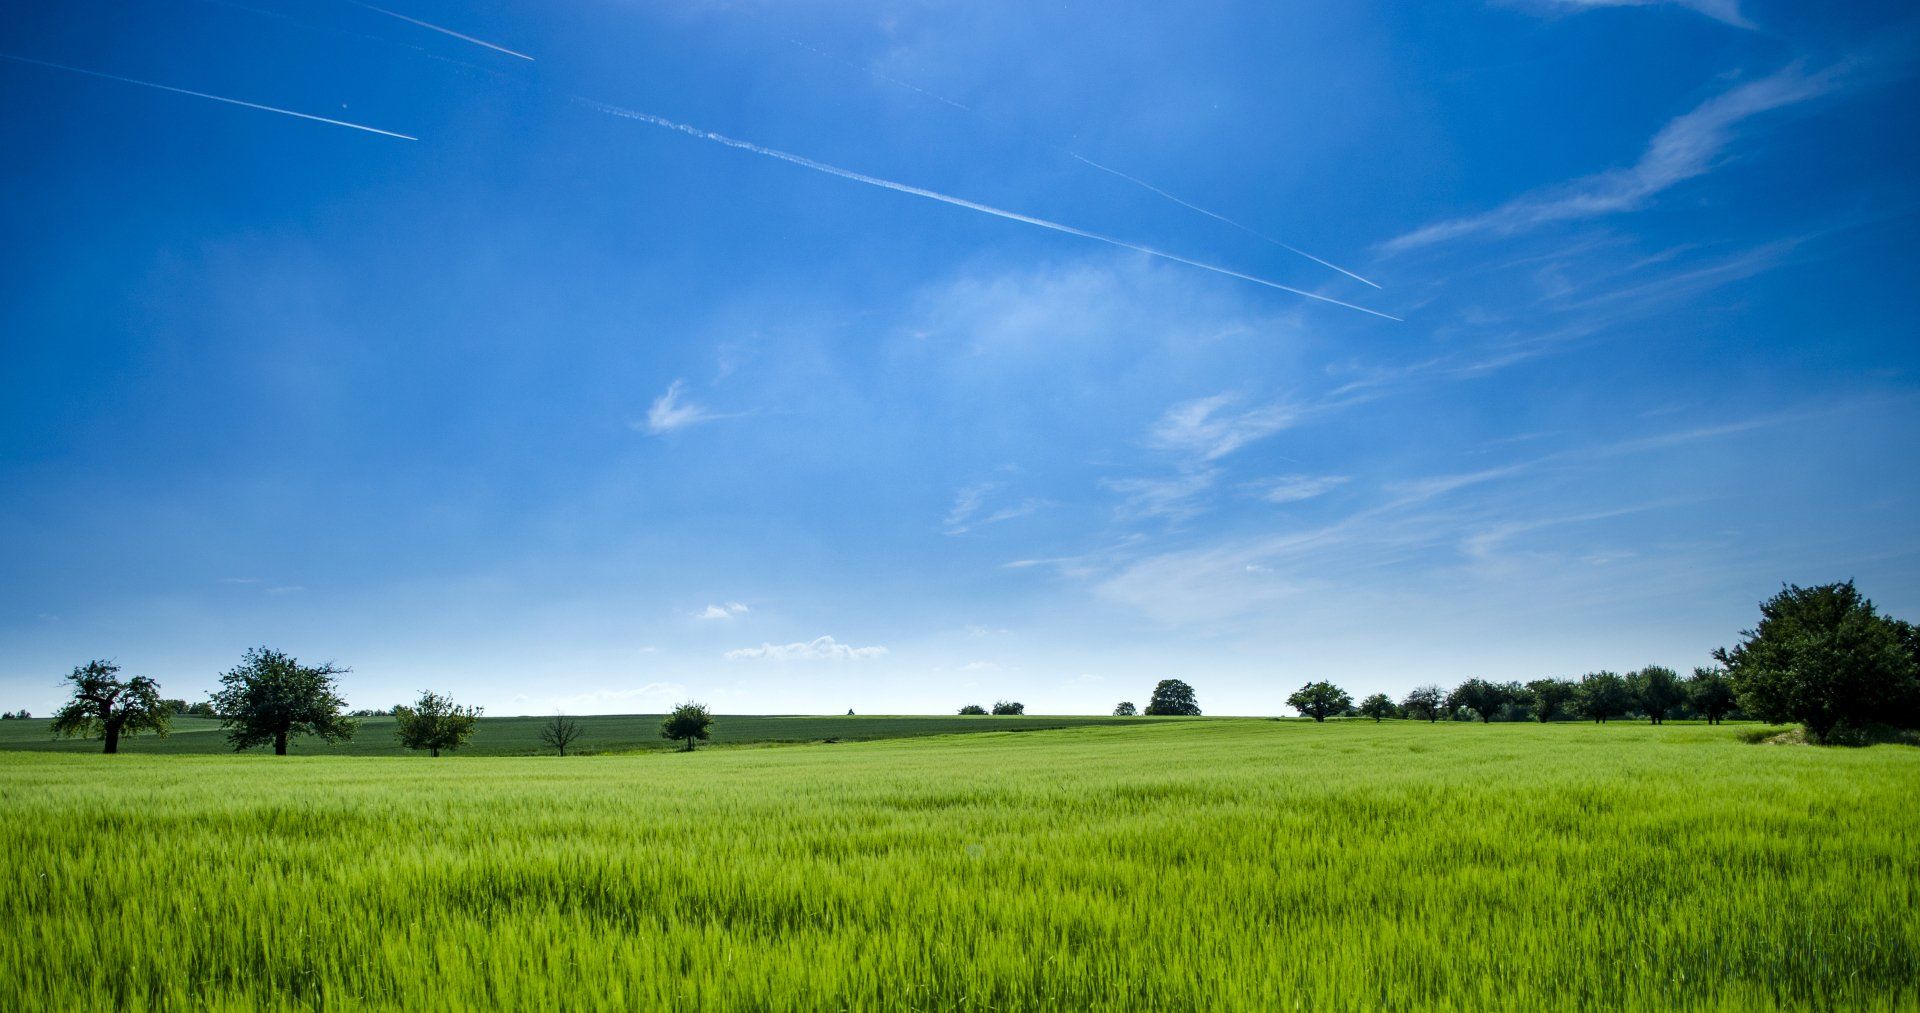 A green field with trees and a blue sky in the background .